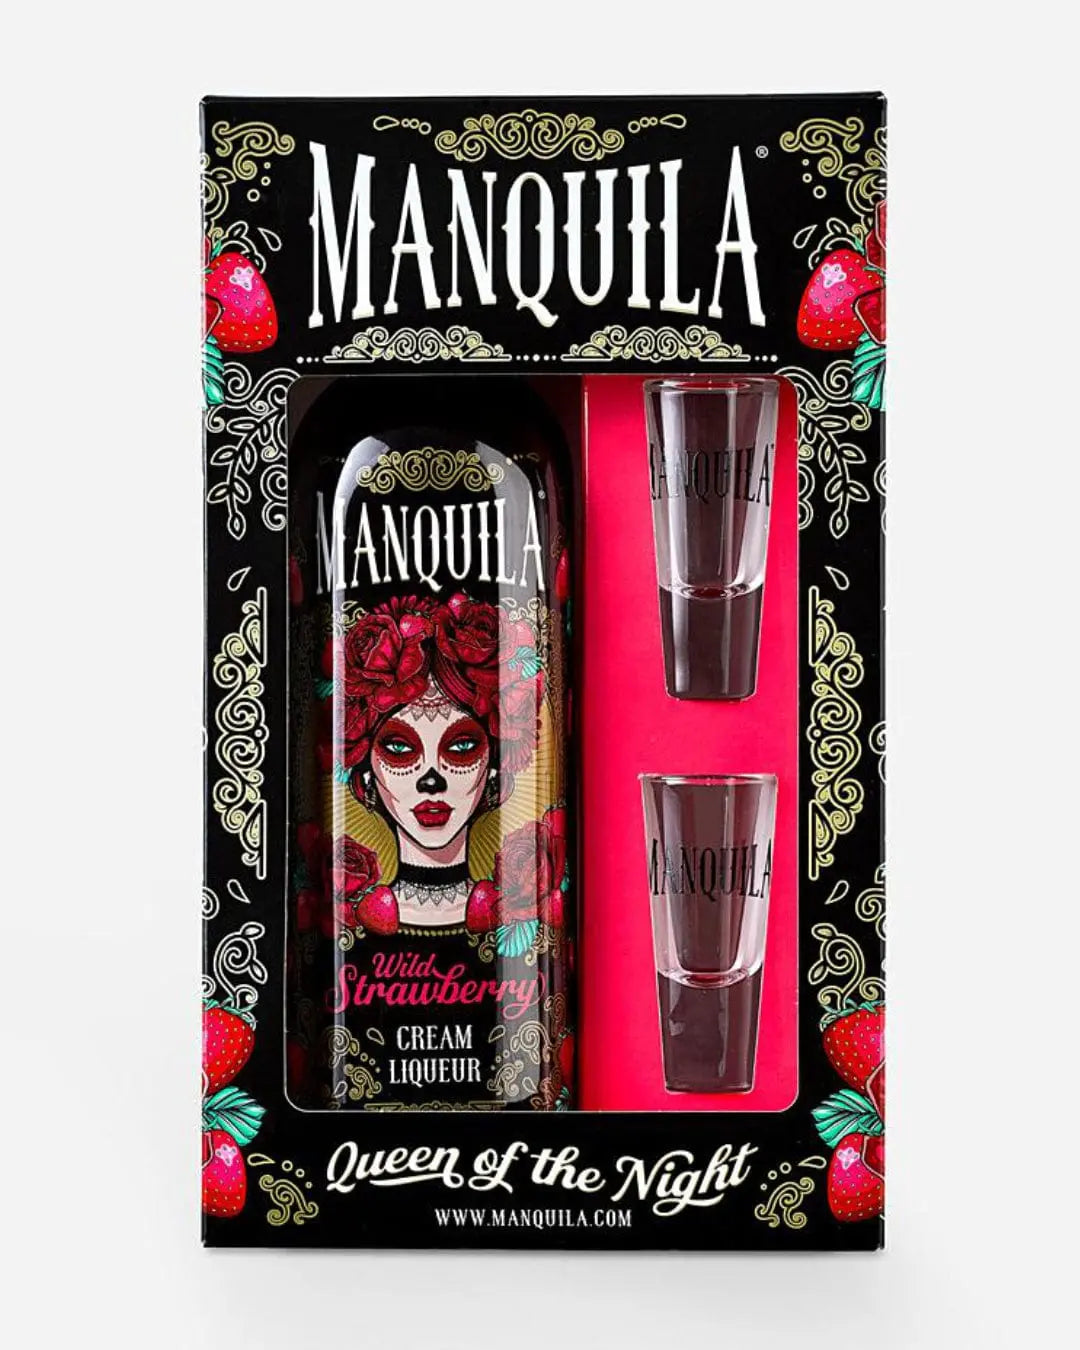 Manquilla Wild Strawberry Cream Liqueur and Shot Glasses Gift Set, 70 cl Liqueurs & Other Spirits